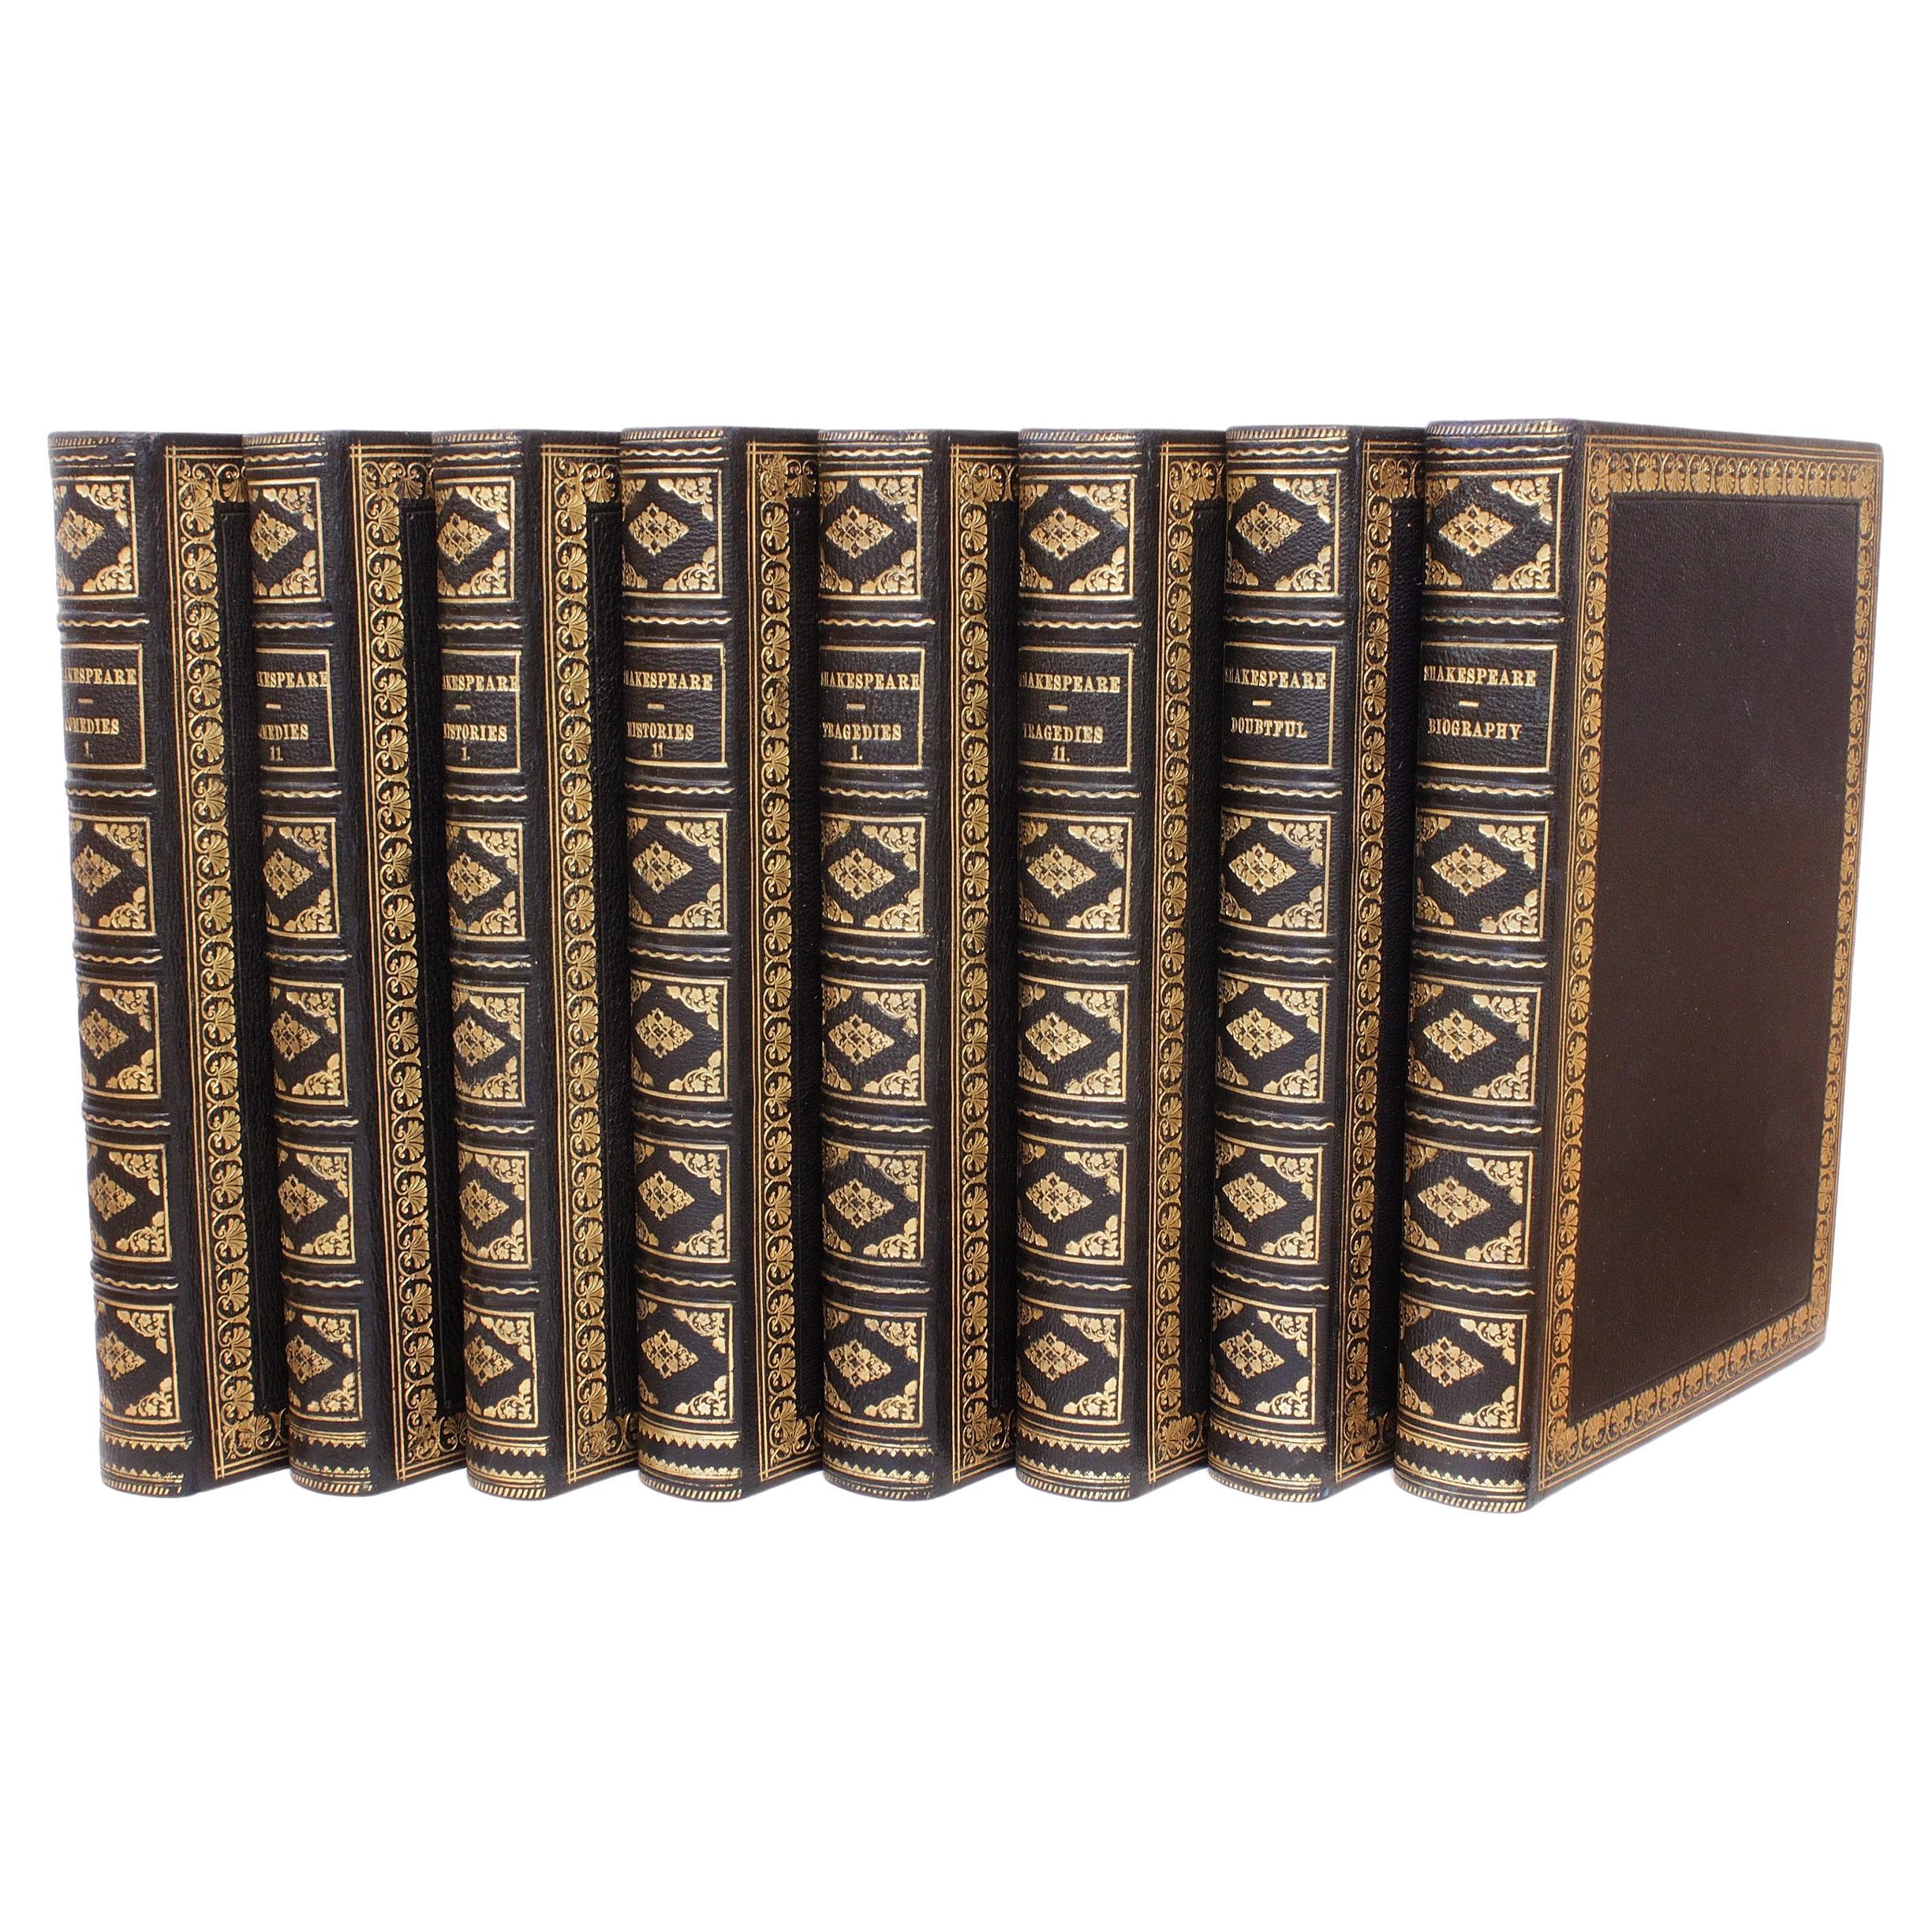 Pictorial Edition - Works Of William Shakespeare - 8 vols. IN FULL LEATHER